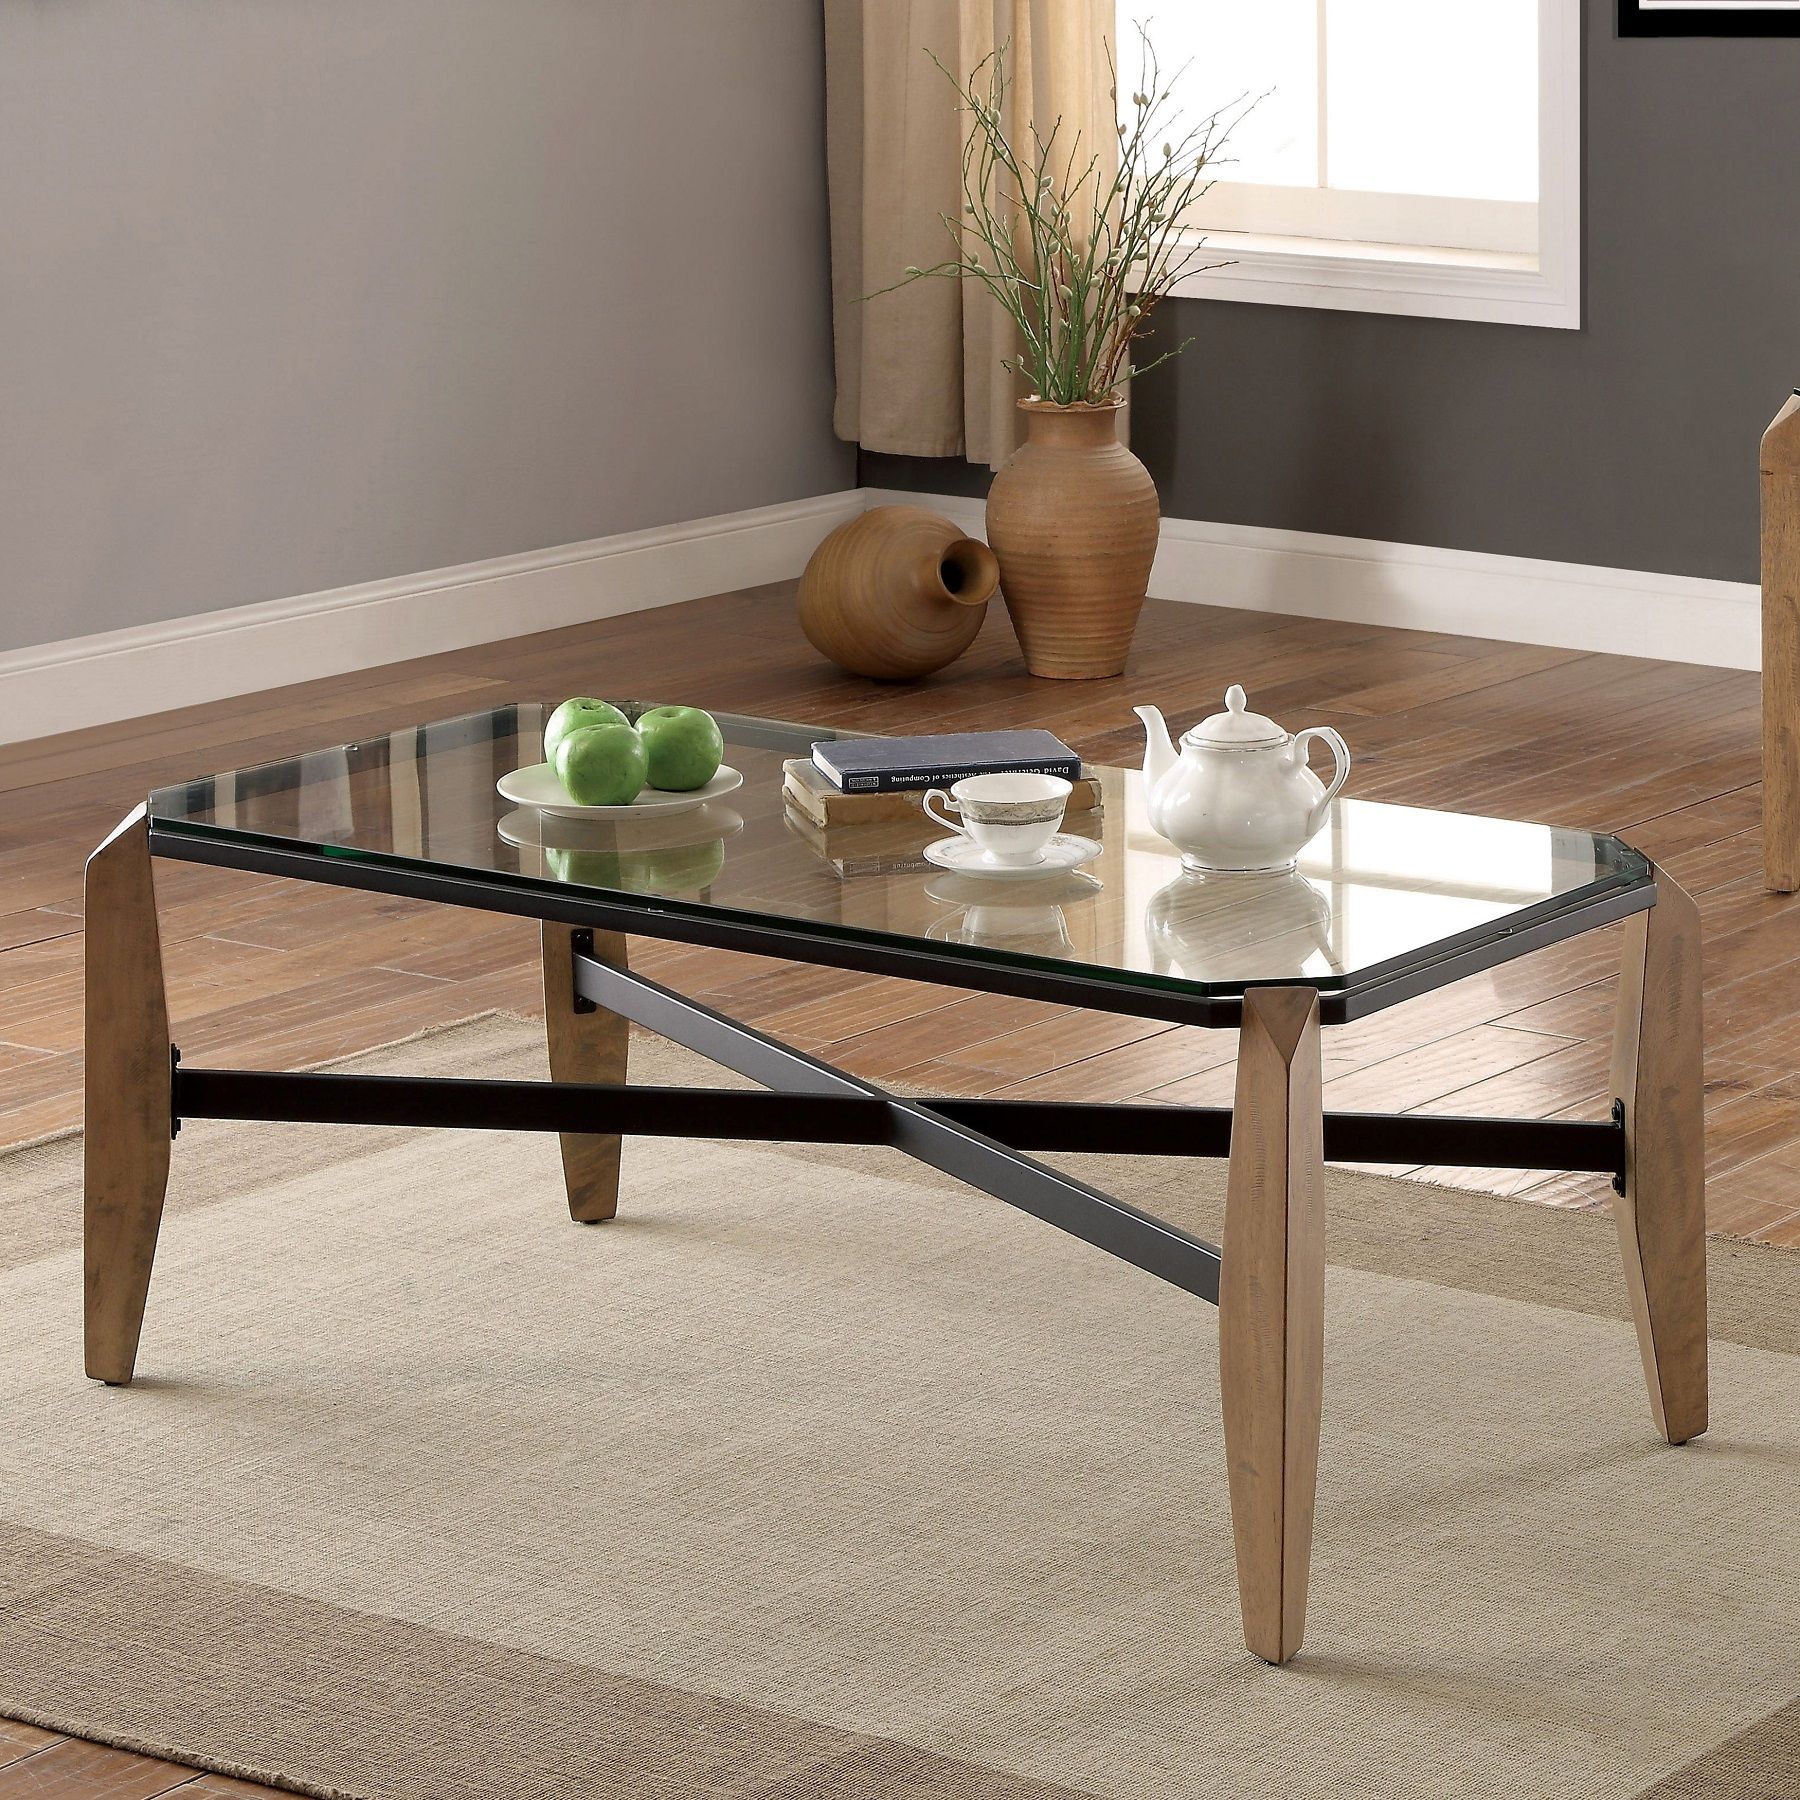 Buy Contemporary Glass Top Coffee Table Online | Teaklab In Smooth Top Coffee Tables (View 2 of 20)